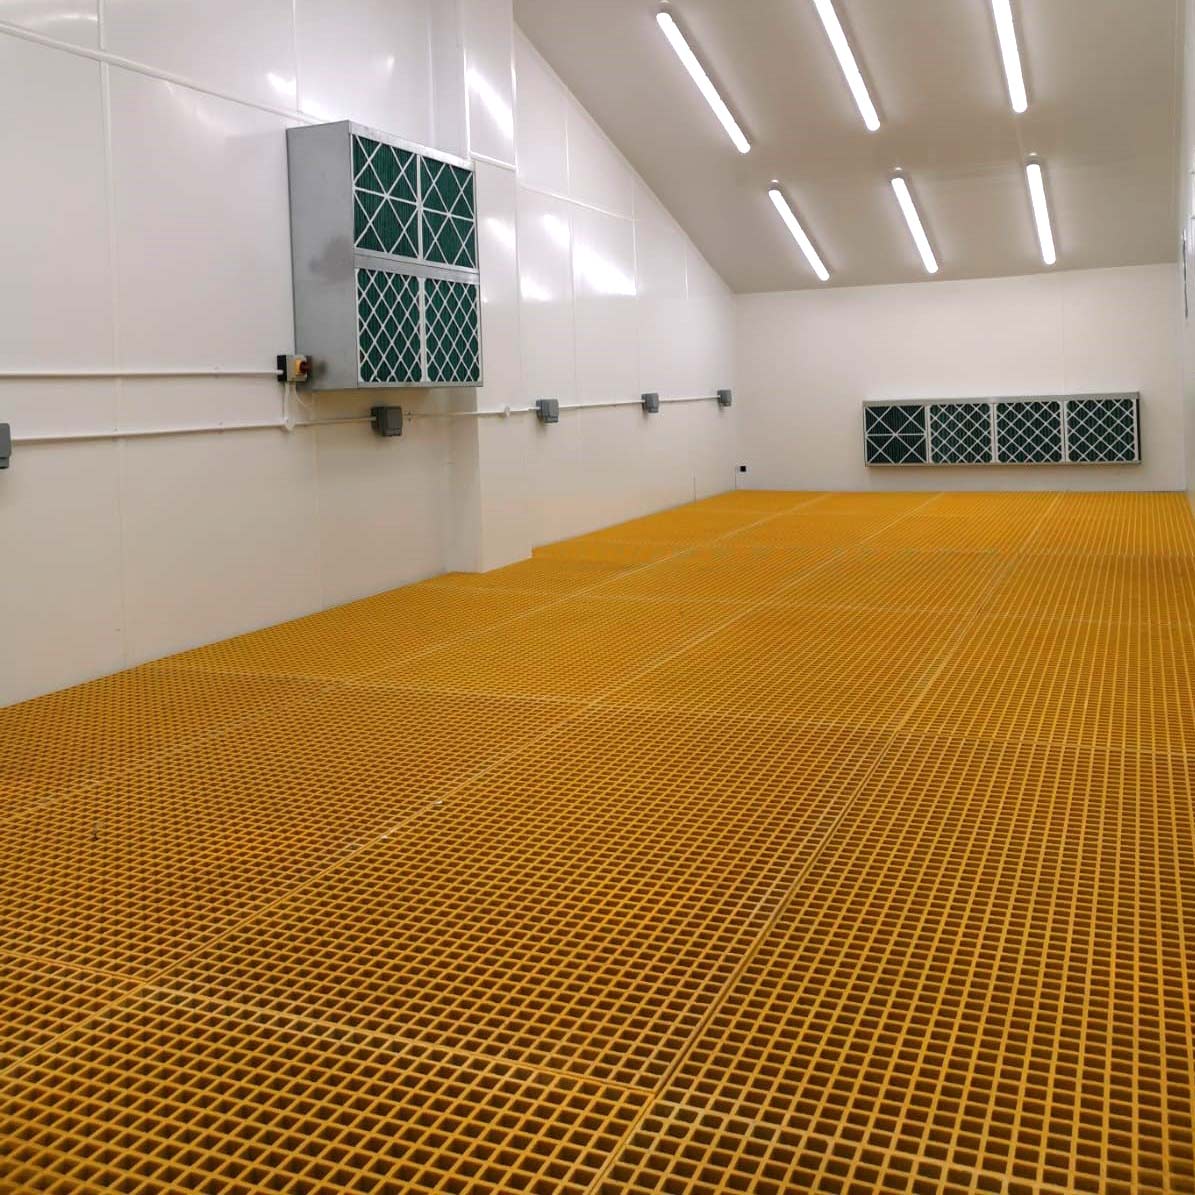 Our new class 3 clean room for high specification 